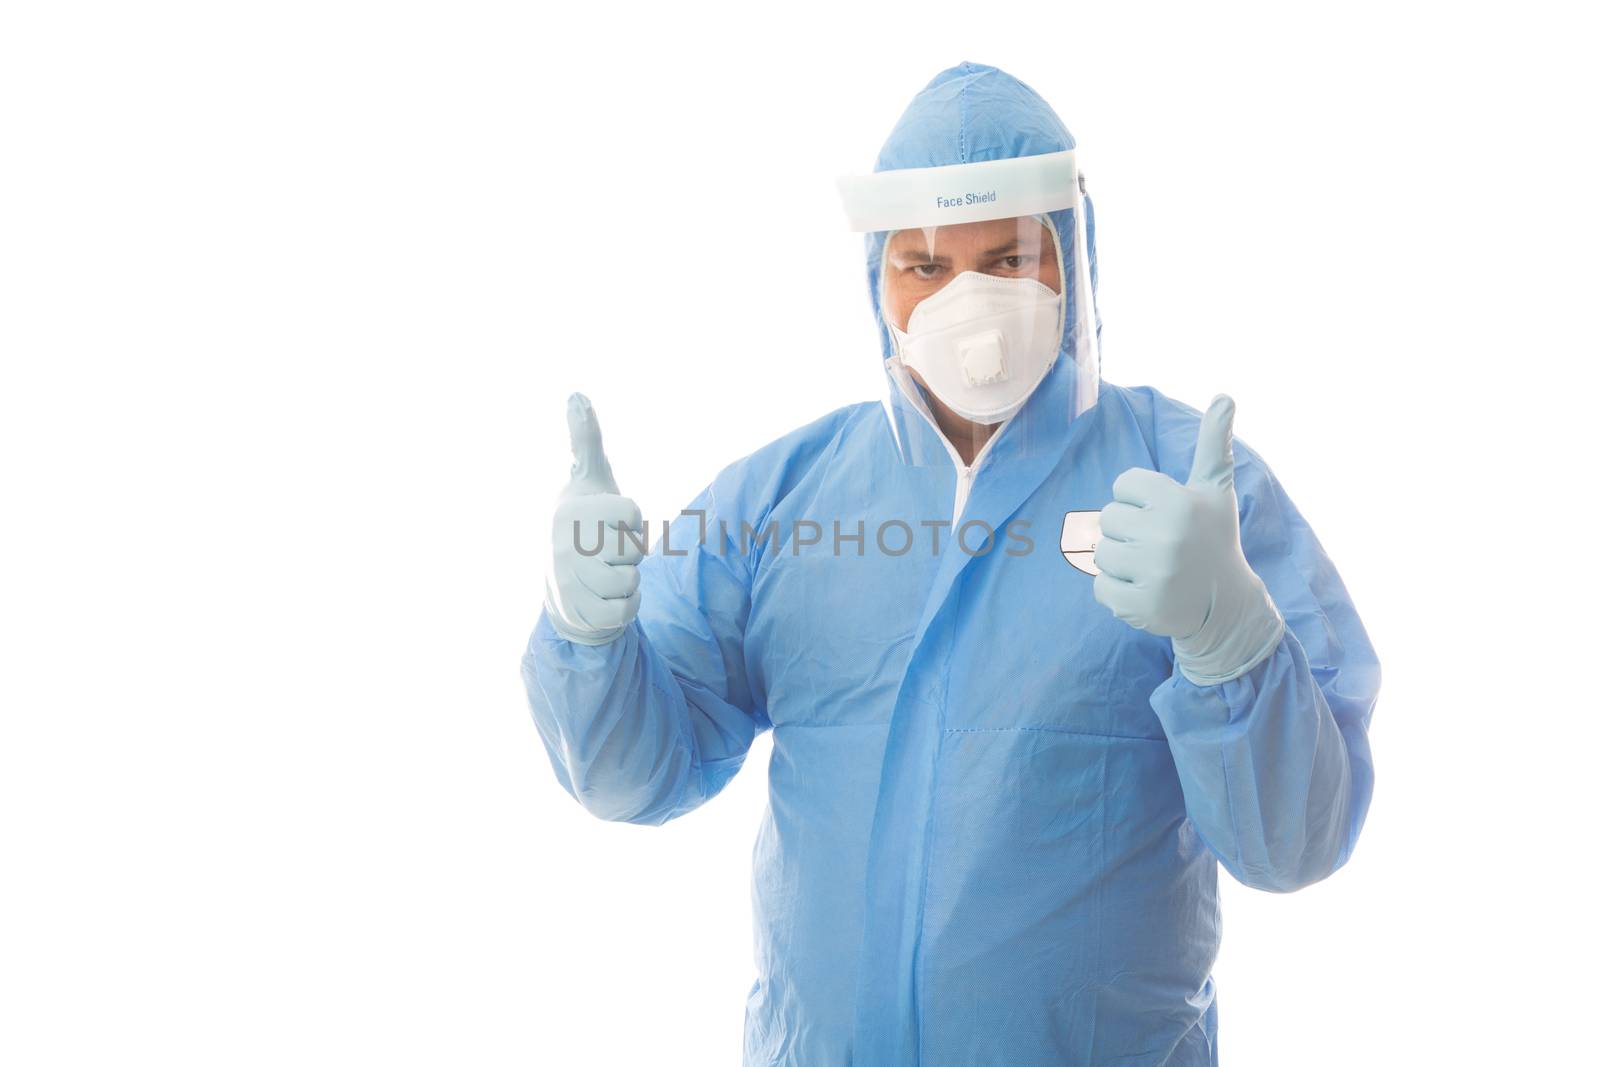 Healthcare or industrial worker in protective hazmat suit gives a successful thumbs up hand gesture.  Hazmat suits are used for industrial clean up, like asbestos and in clinical laboratory and medical industries for example treating coronavirus or ebola pandemics